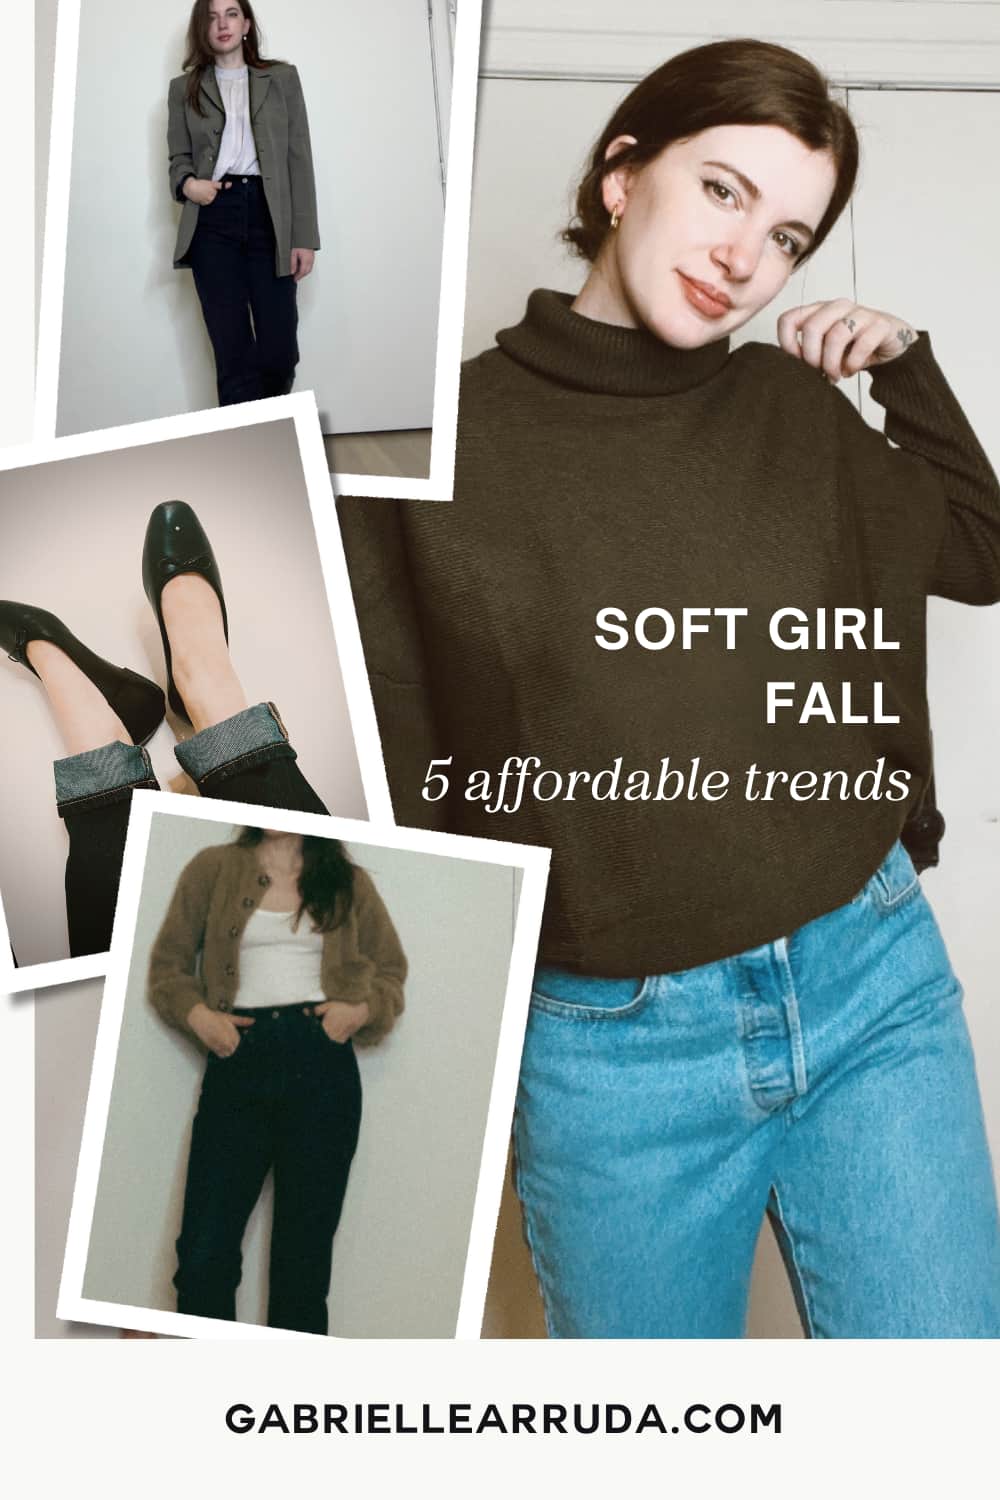 fall fashion trends, affordable, soft girl fall (ballet flats, levis, cozy cardigan)